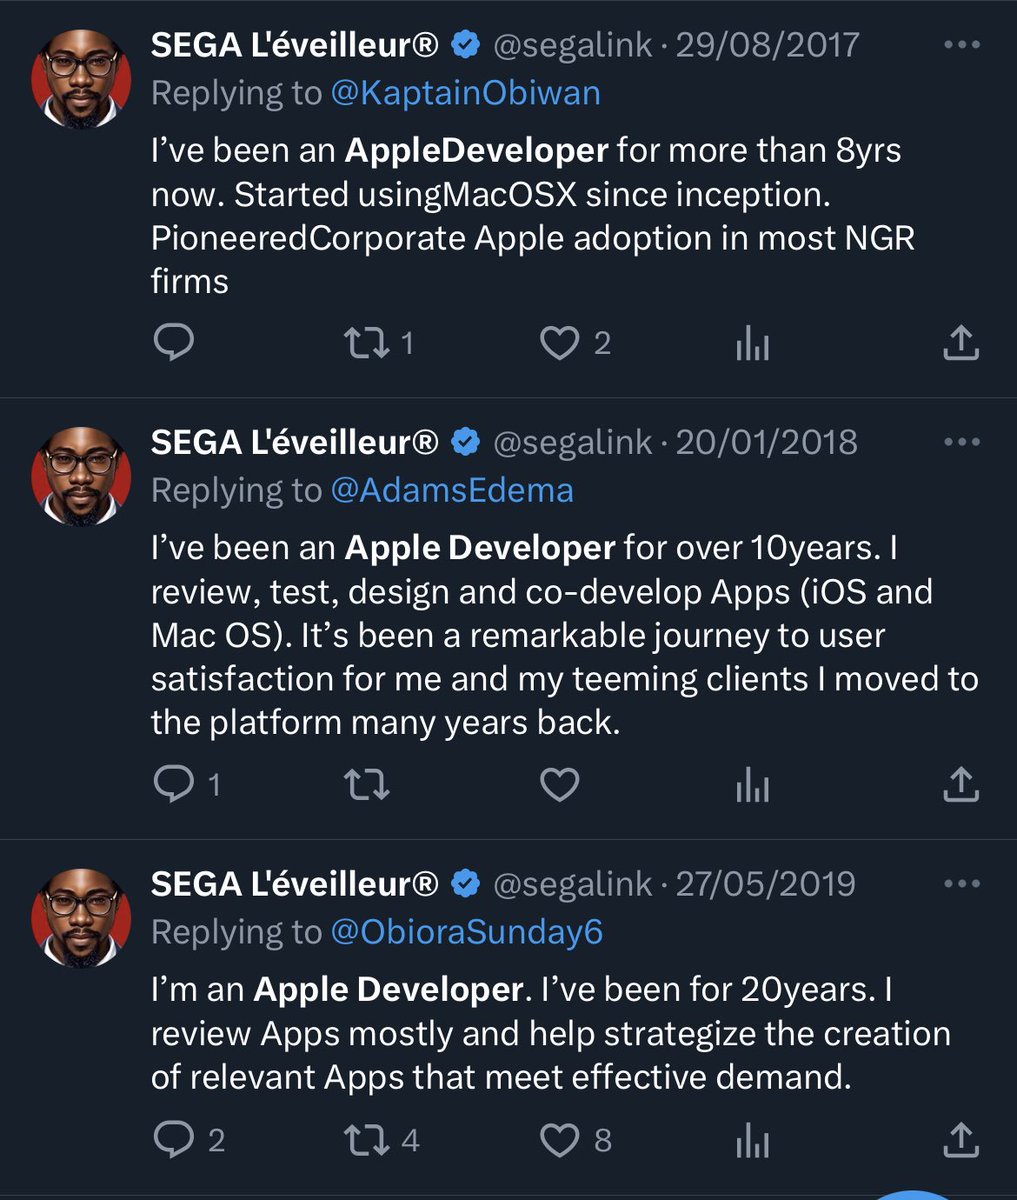 2017: over 8 years an Apple developer.

2018: over 10 years an Apple developer.

2019: 20 years an Apple developer.

🤔